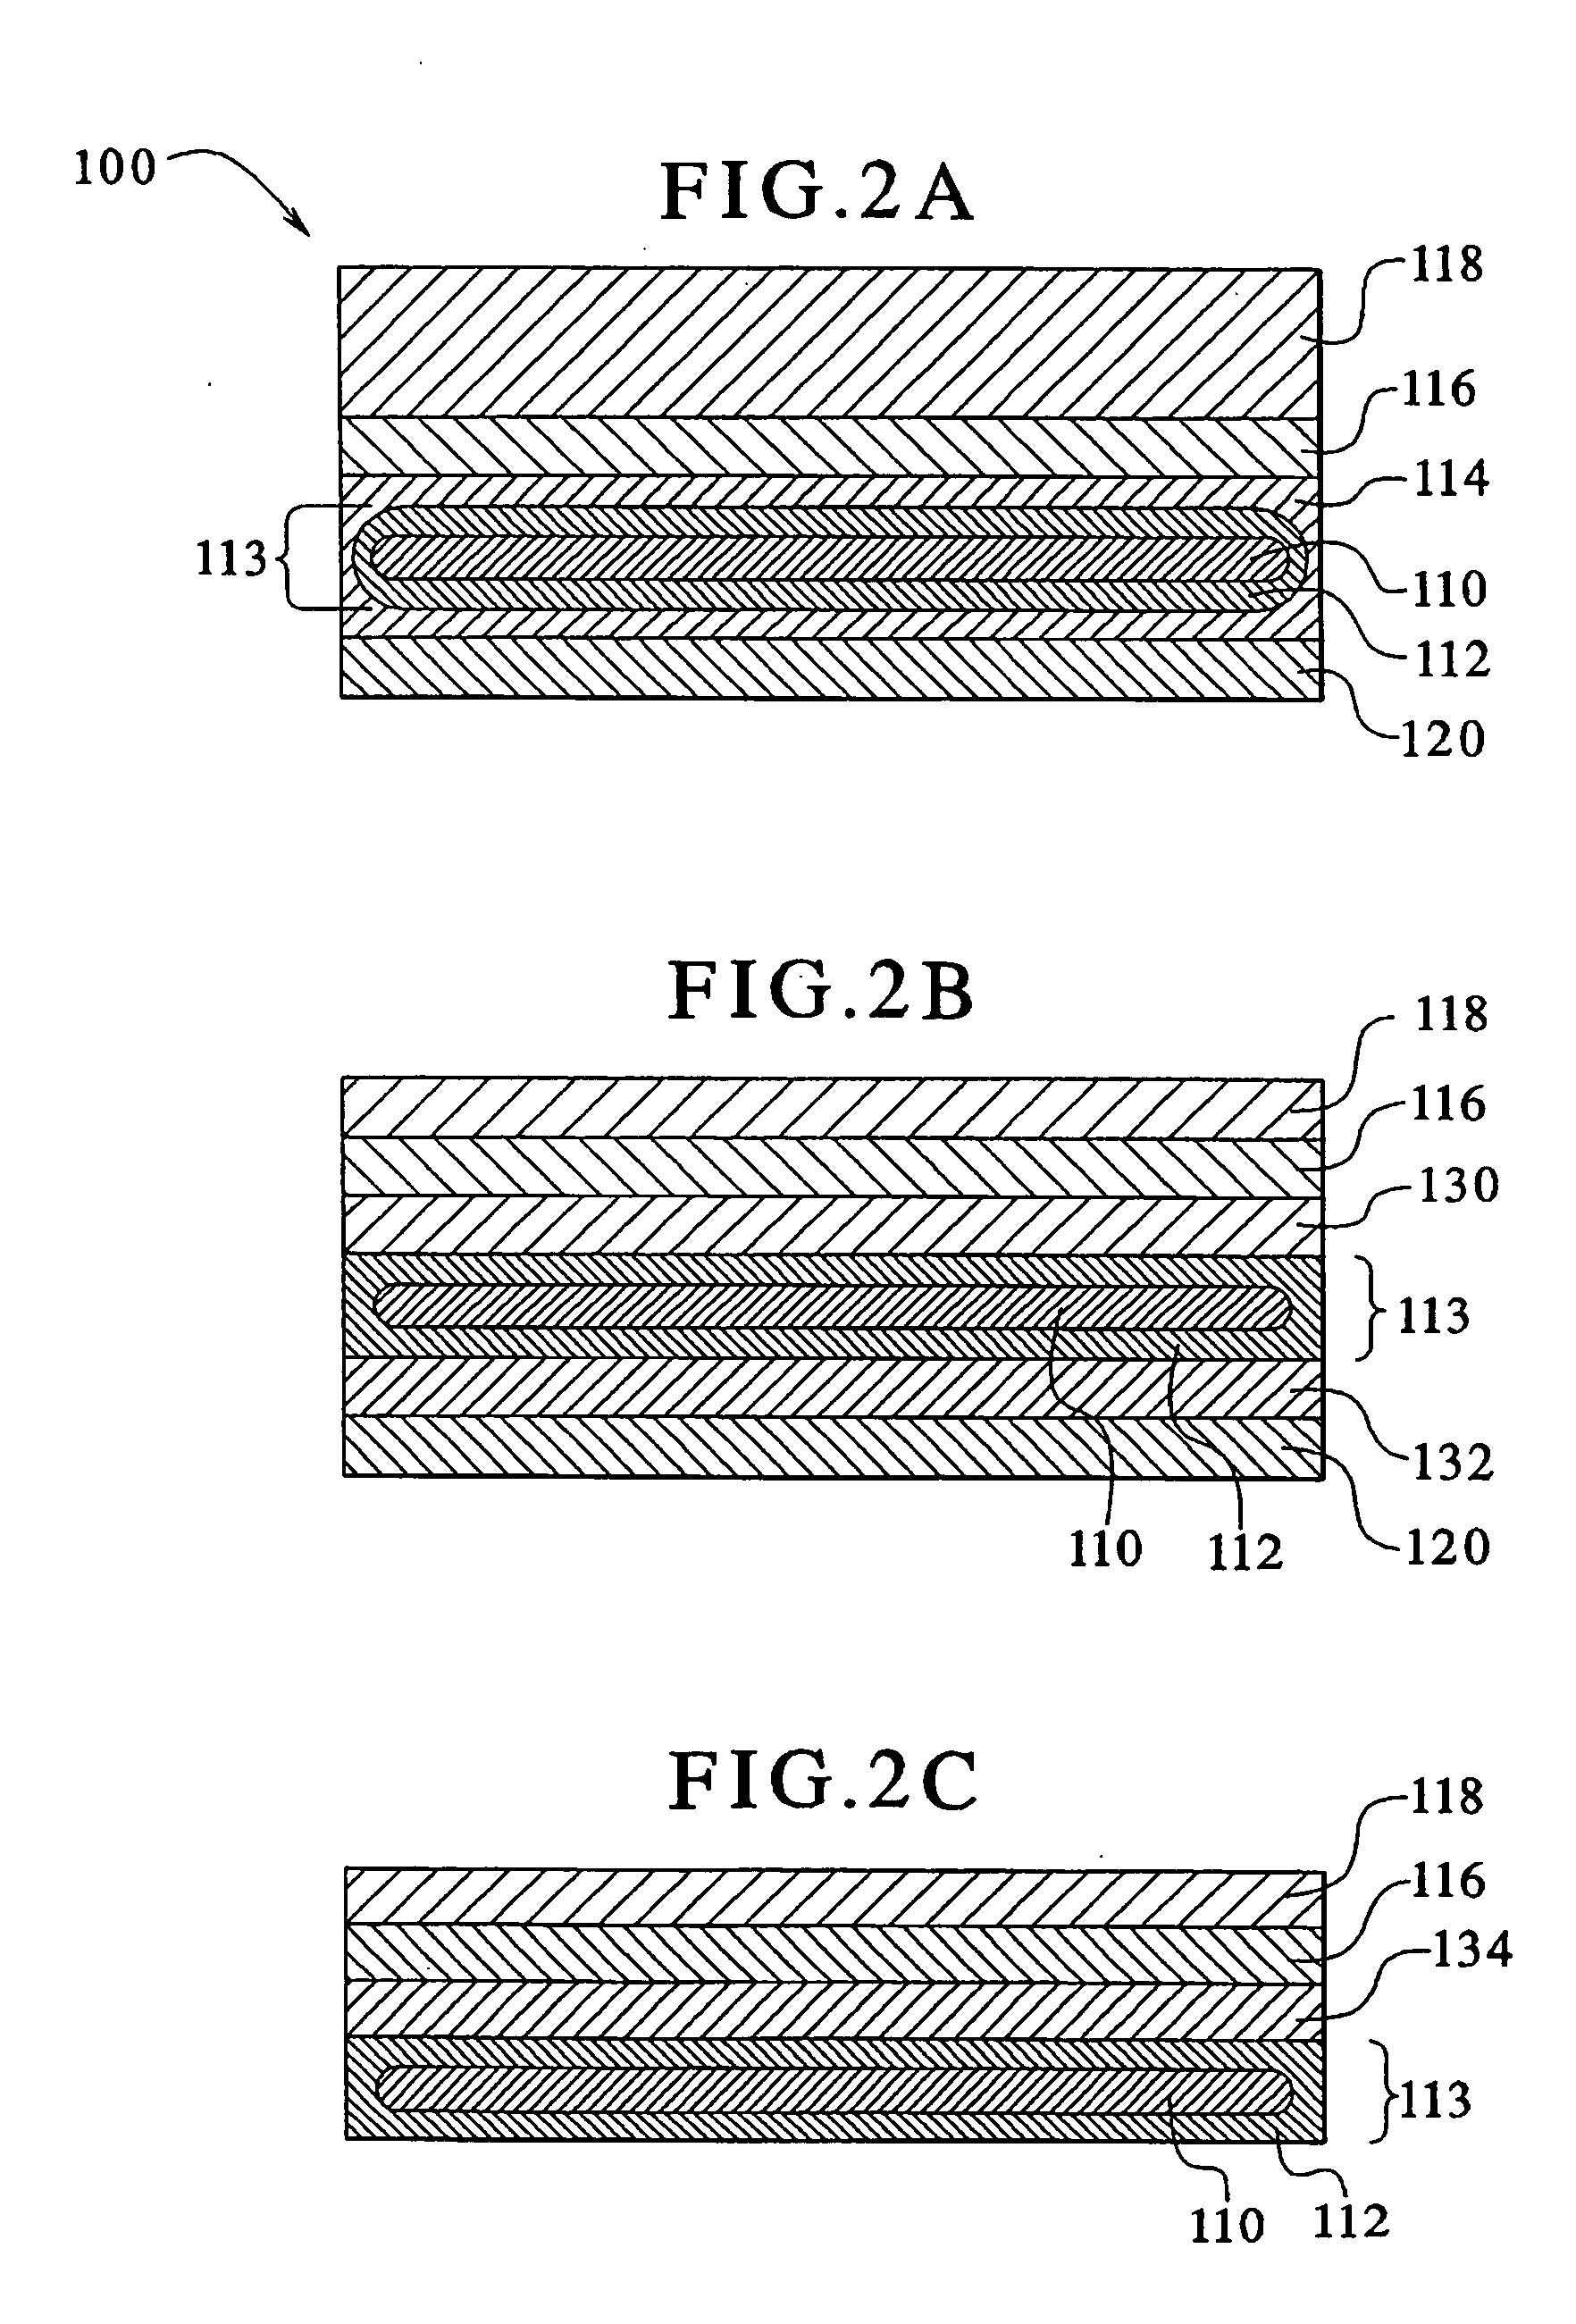 Encapsulated barrier for flexible films and a method of making and using the same